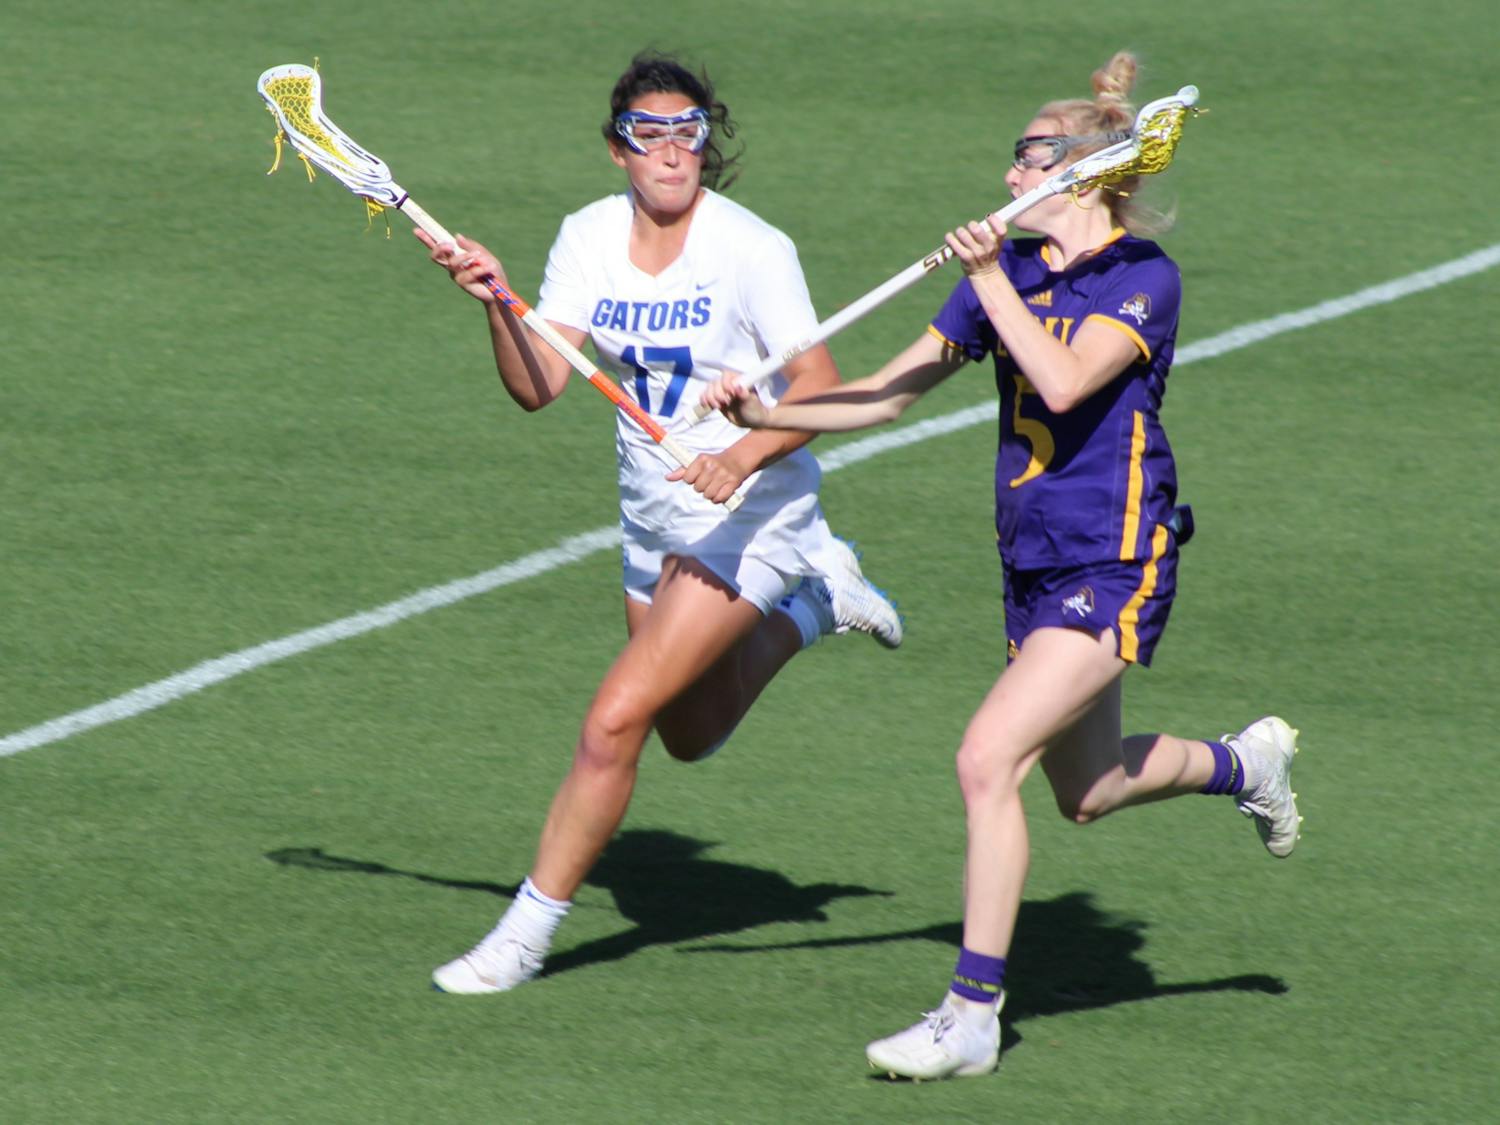 Shannon Kavanagh helped lead the Gators offensively to a 20-9 victory Thursday.